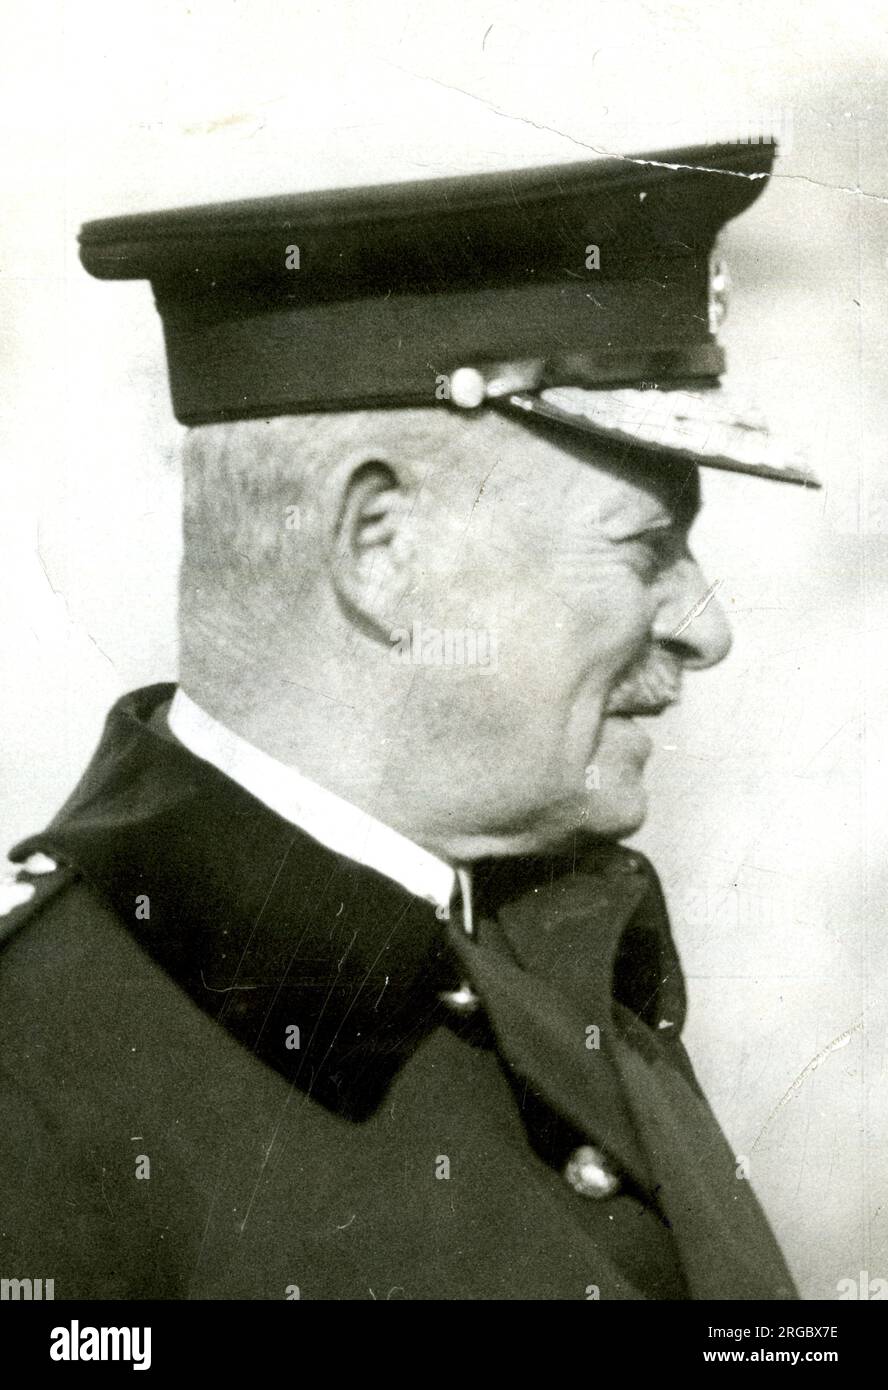 Julian Byng, 1st Viscount Byng of Vimy, British Army officer during WW1, later Commissioner of Police in London (1928-1931) Stock Photo